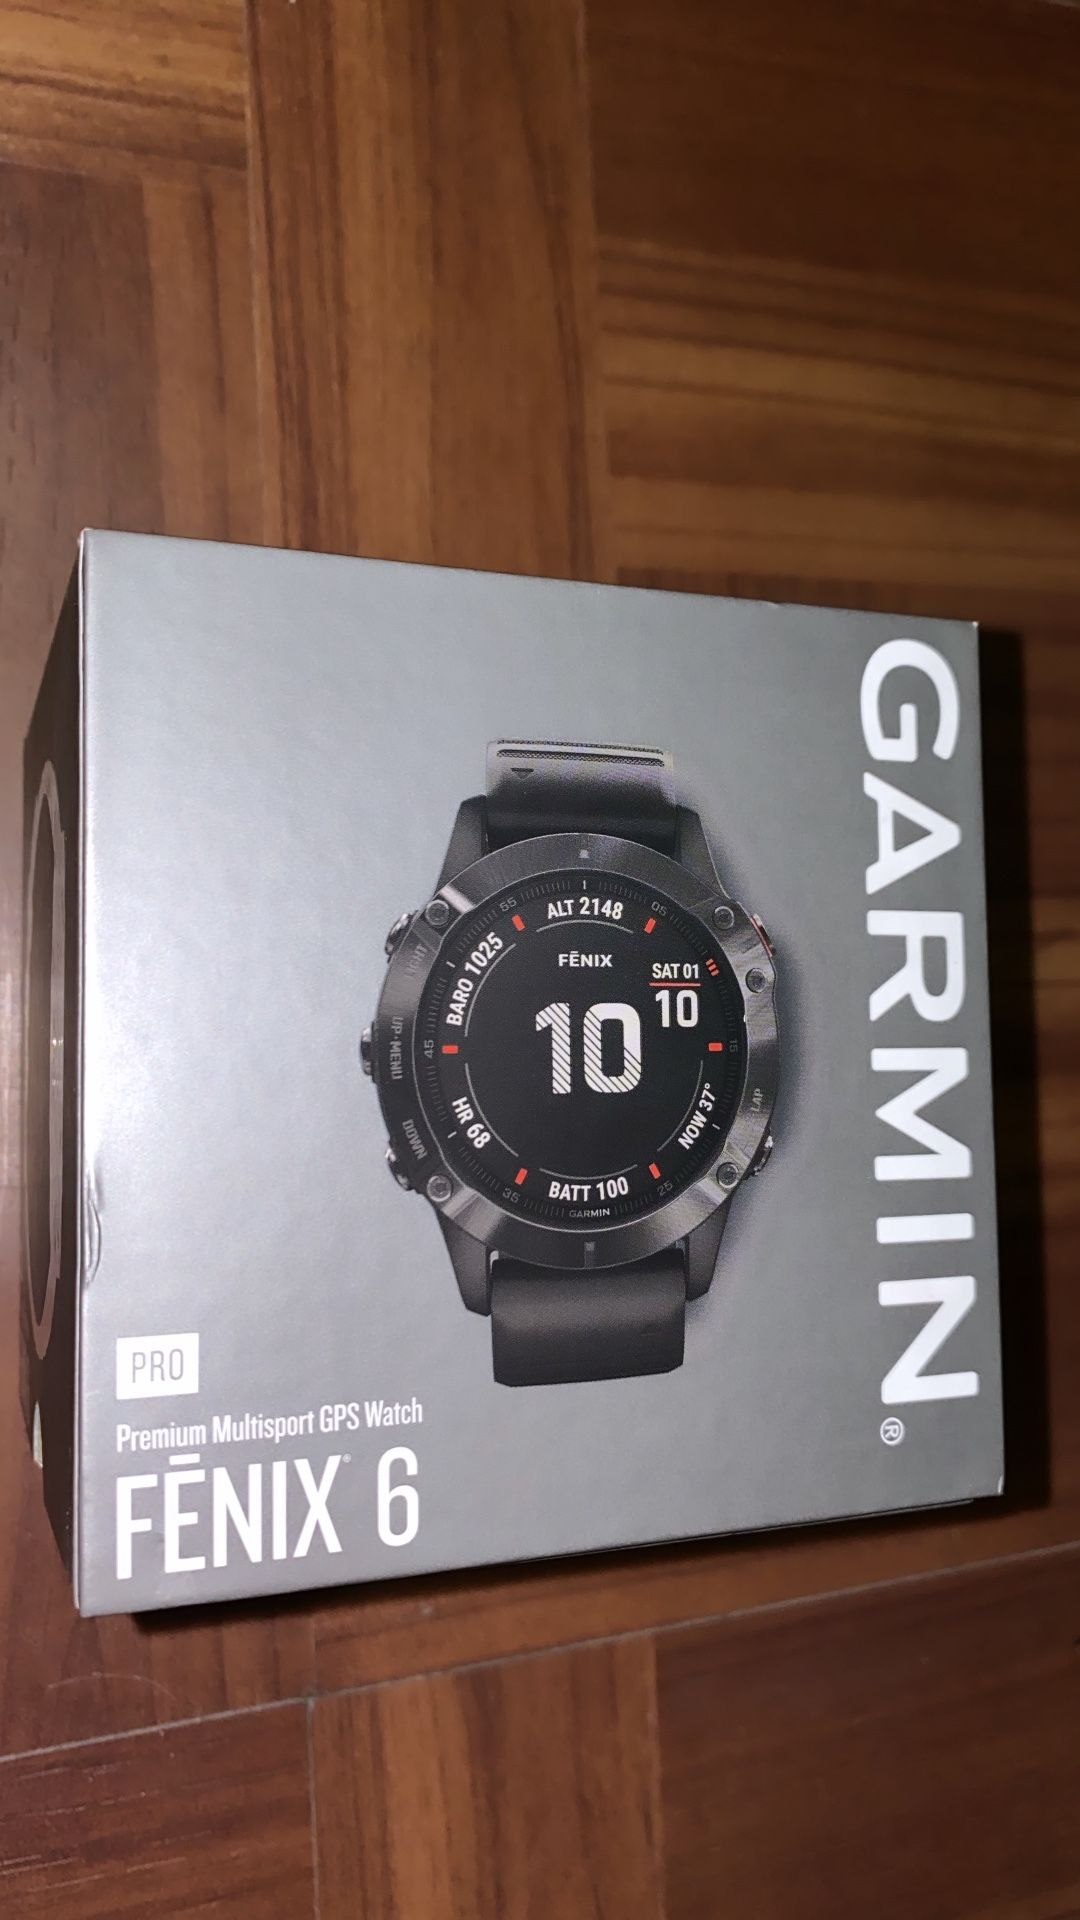 Garmin Fenix 6 Pro, Premium Multisport GPS Watch, features Mapping, Music, Grade-Adjusted Pace Guidance and Pulse Ox Sensors, Black